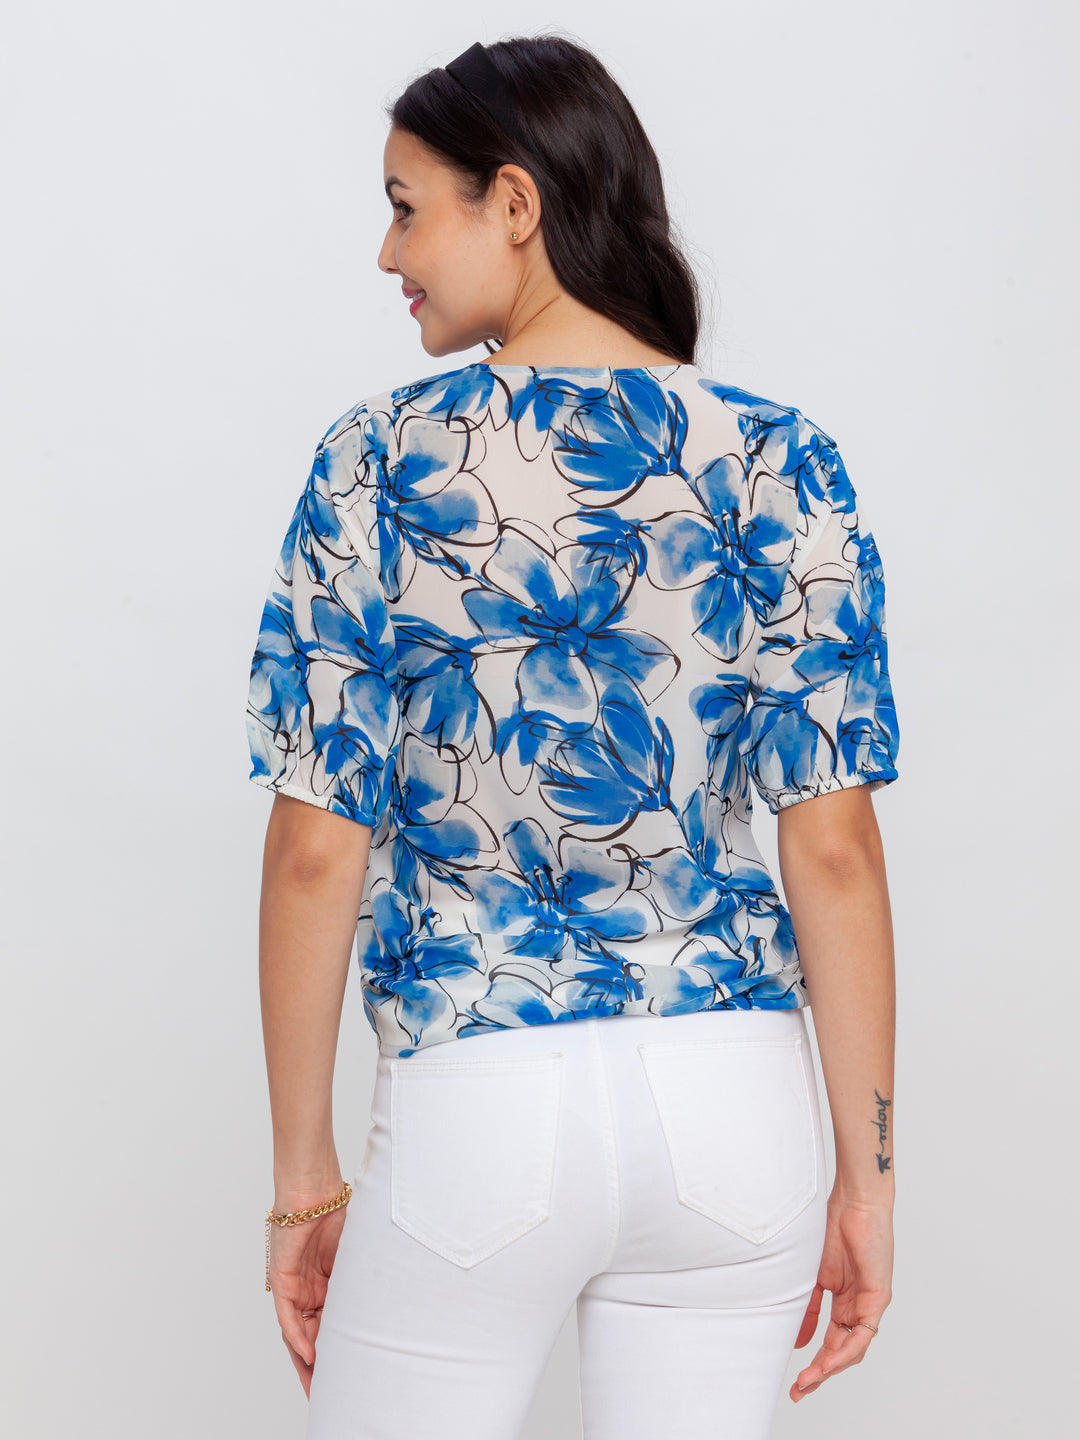 Off White Printed Tie-Up Top For Women